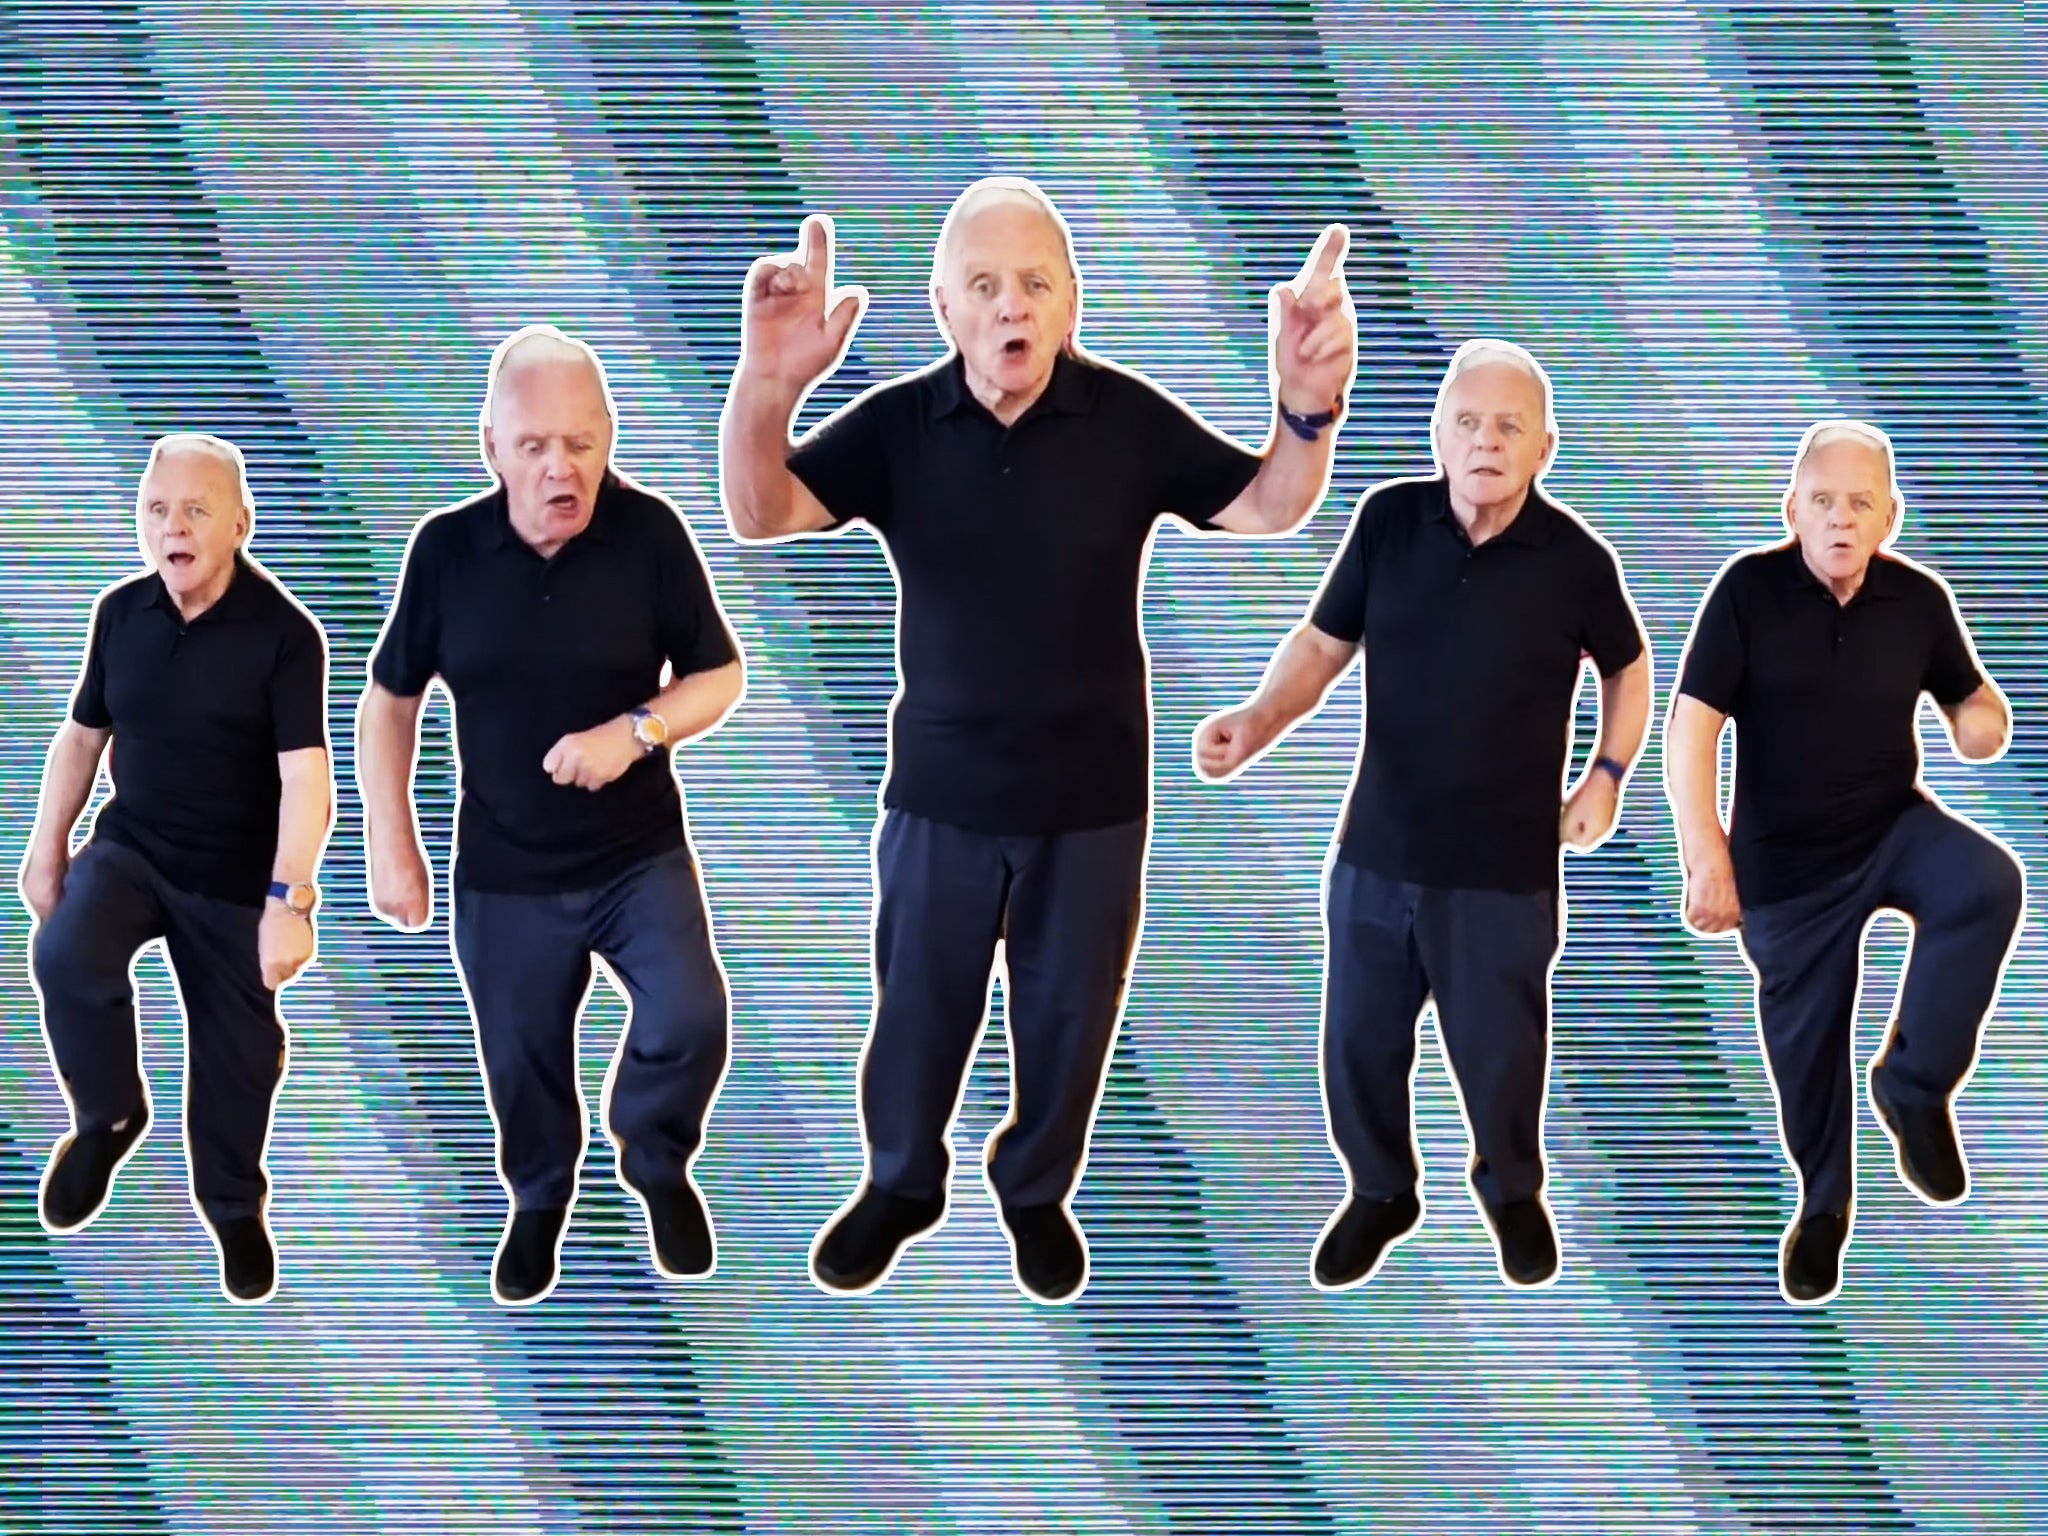 Old, famous and online: Sir Anthony Hopkins dances to Drake on his TikTok